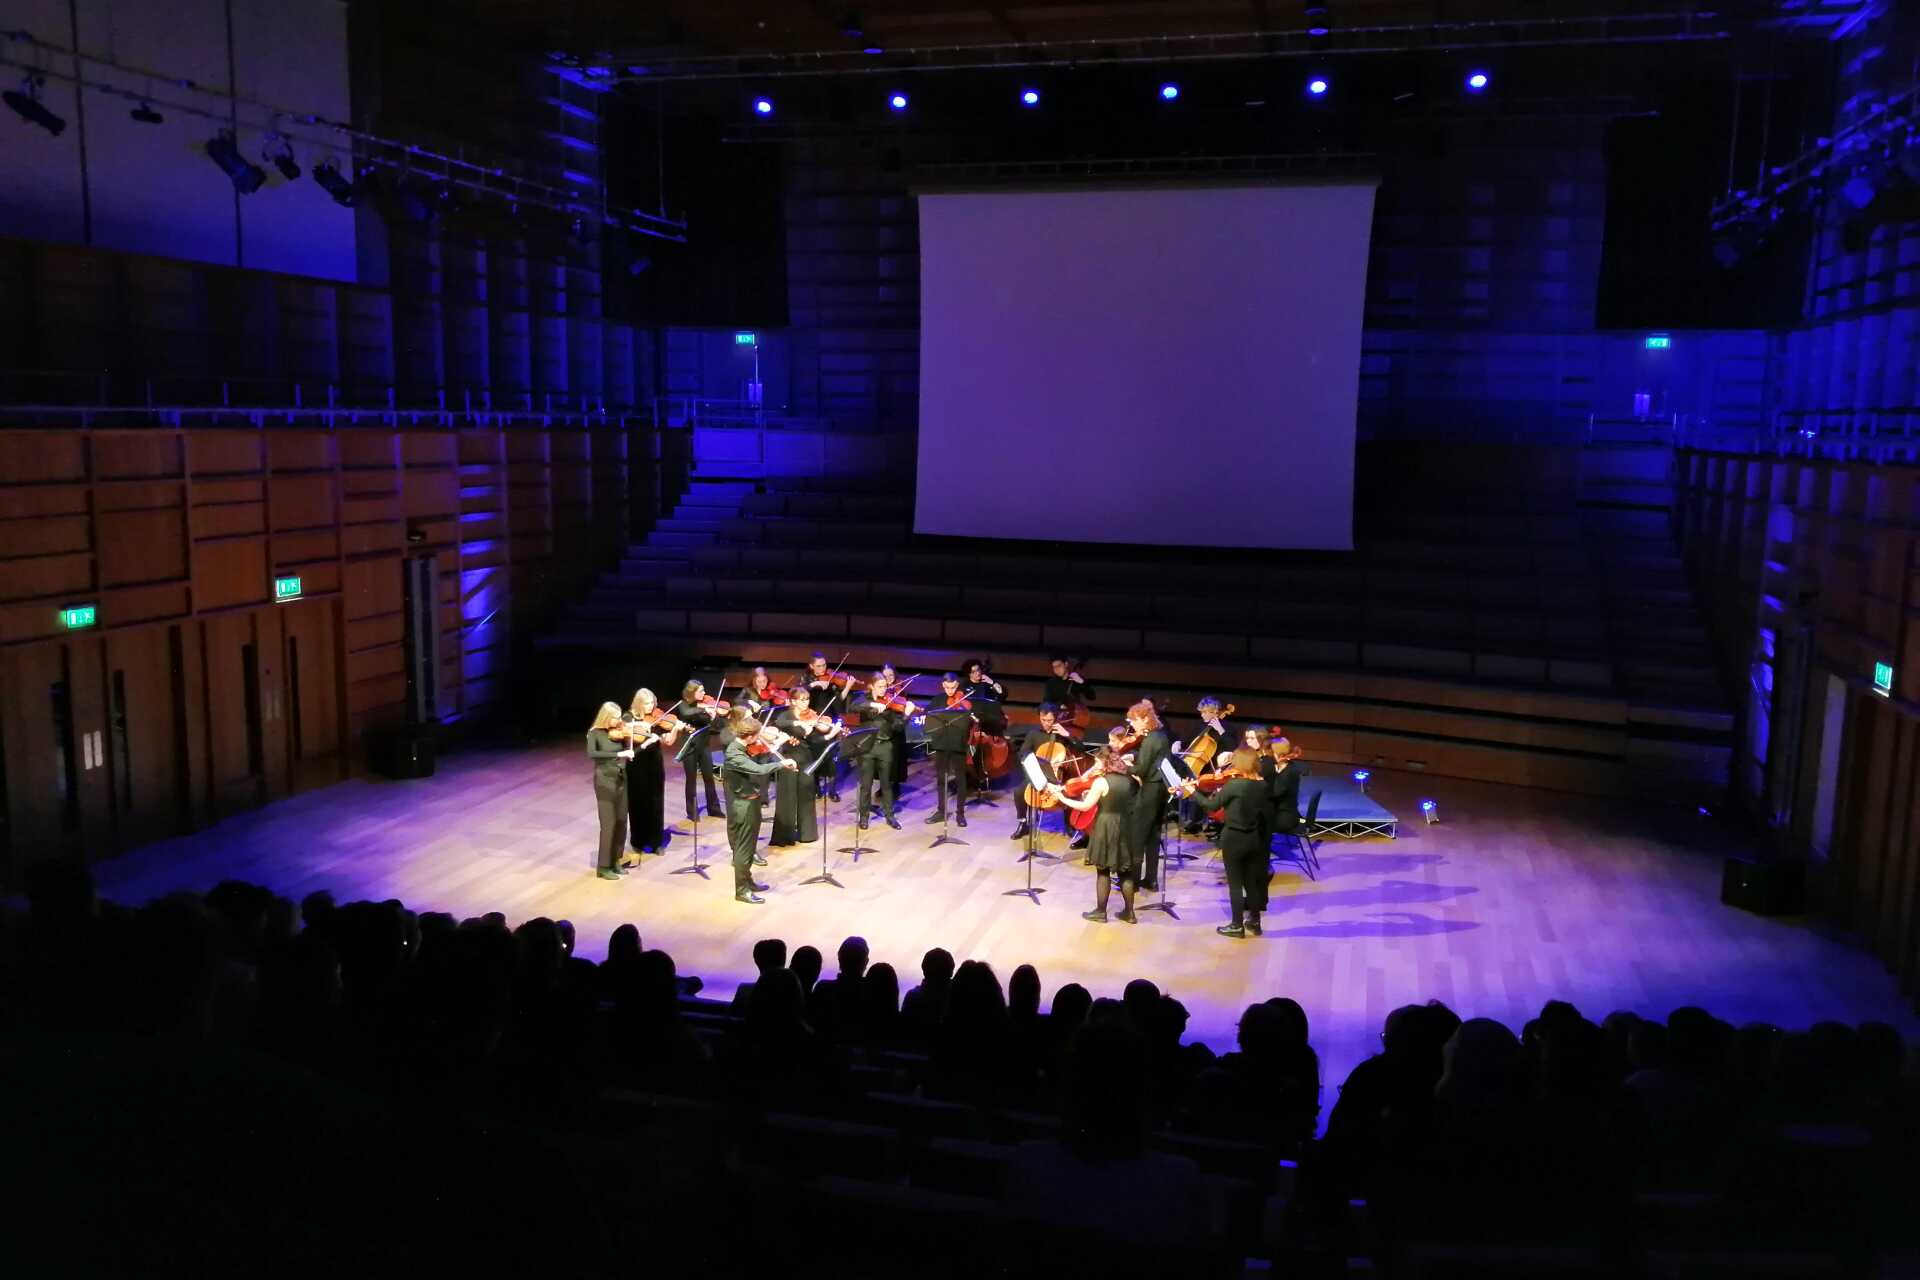 String orchestra performing in a concert hall